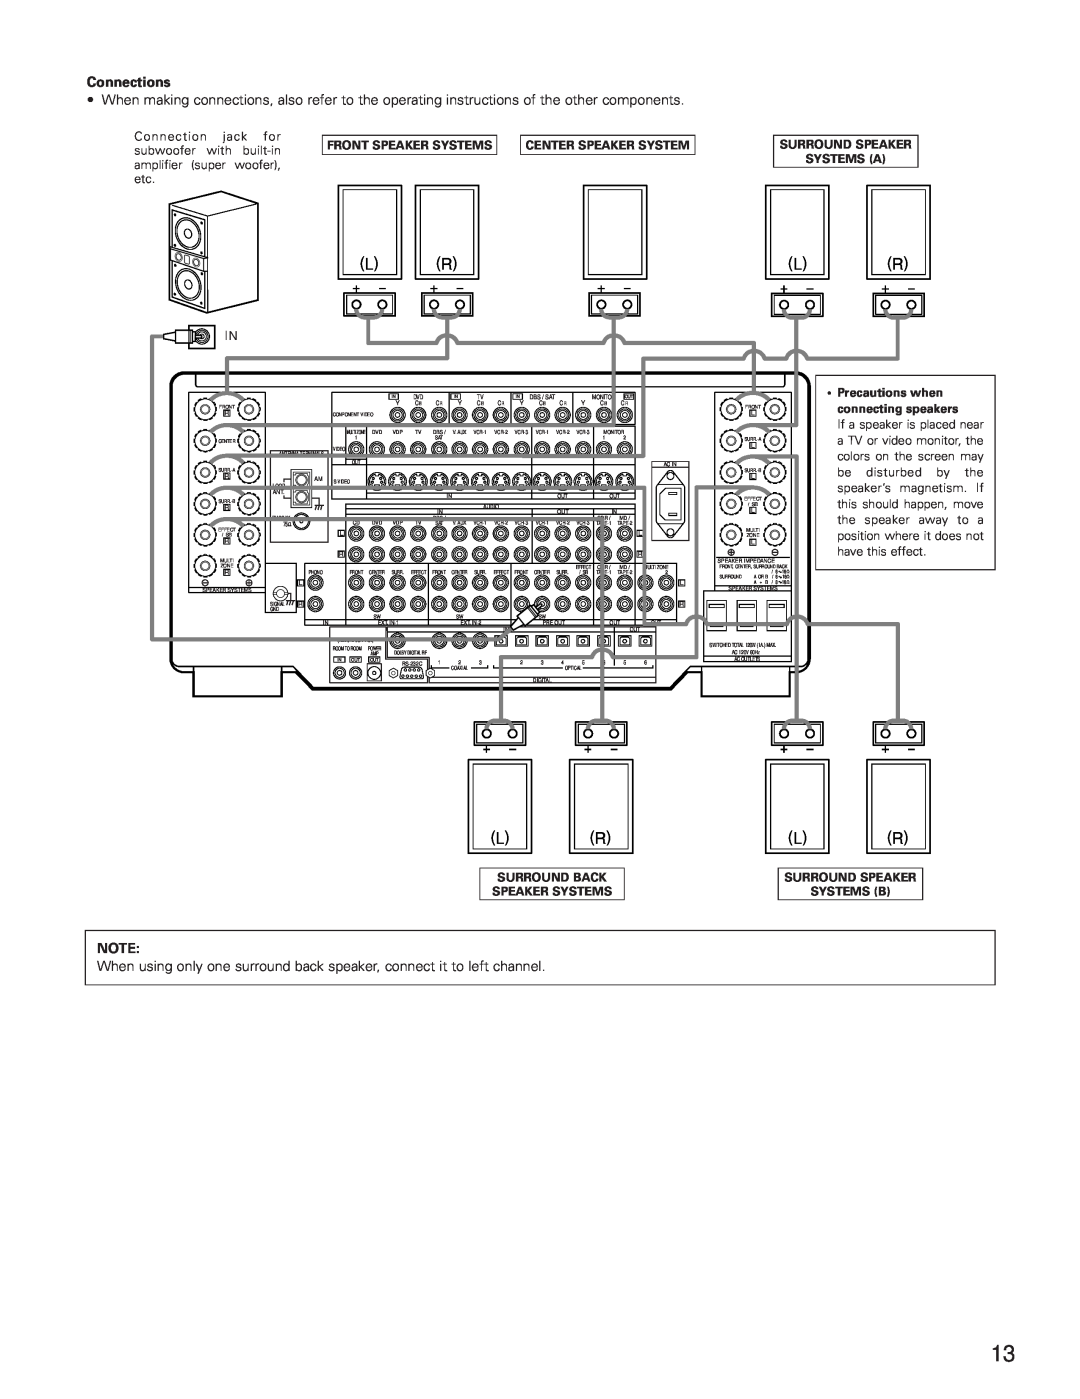 Denon AVR-5800 operating instructions Connections 